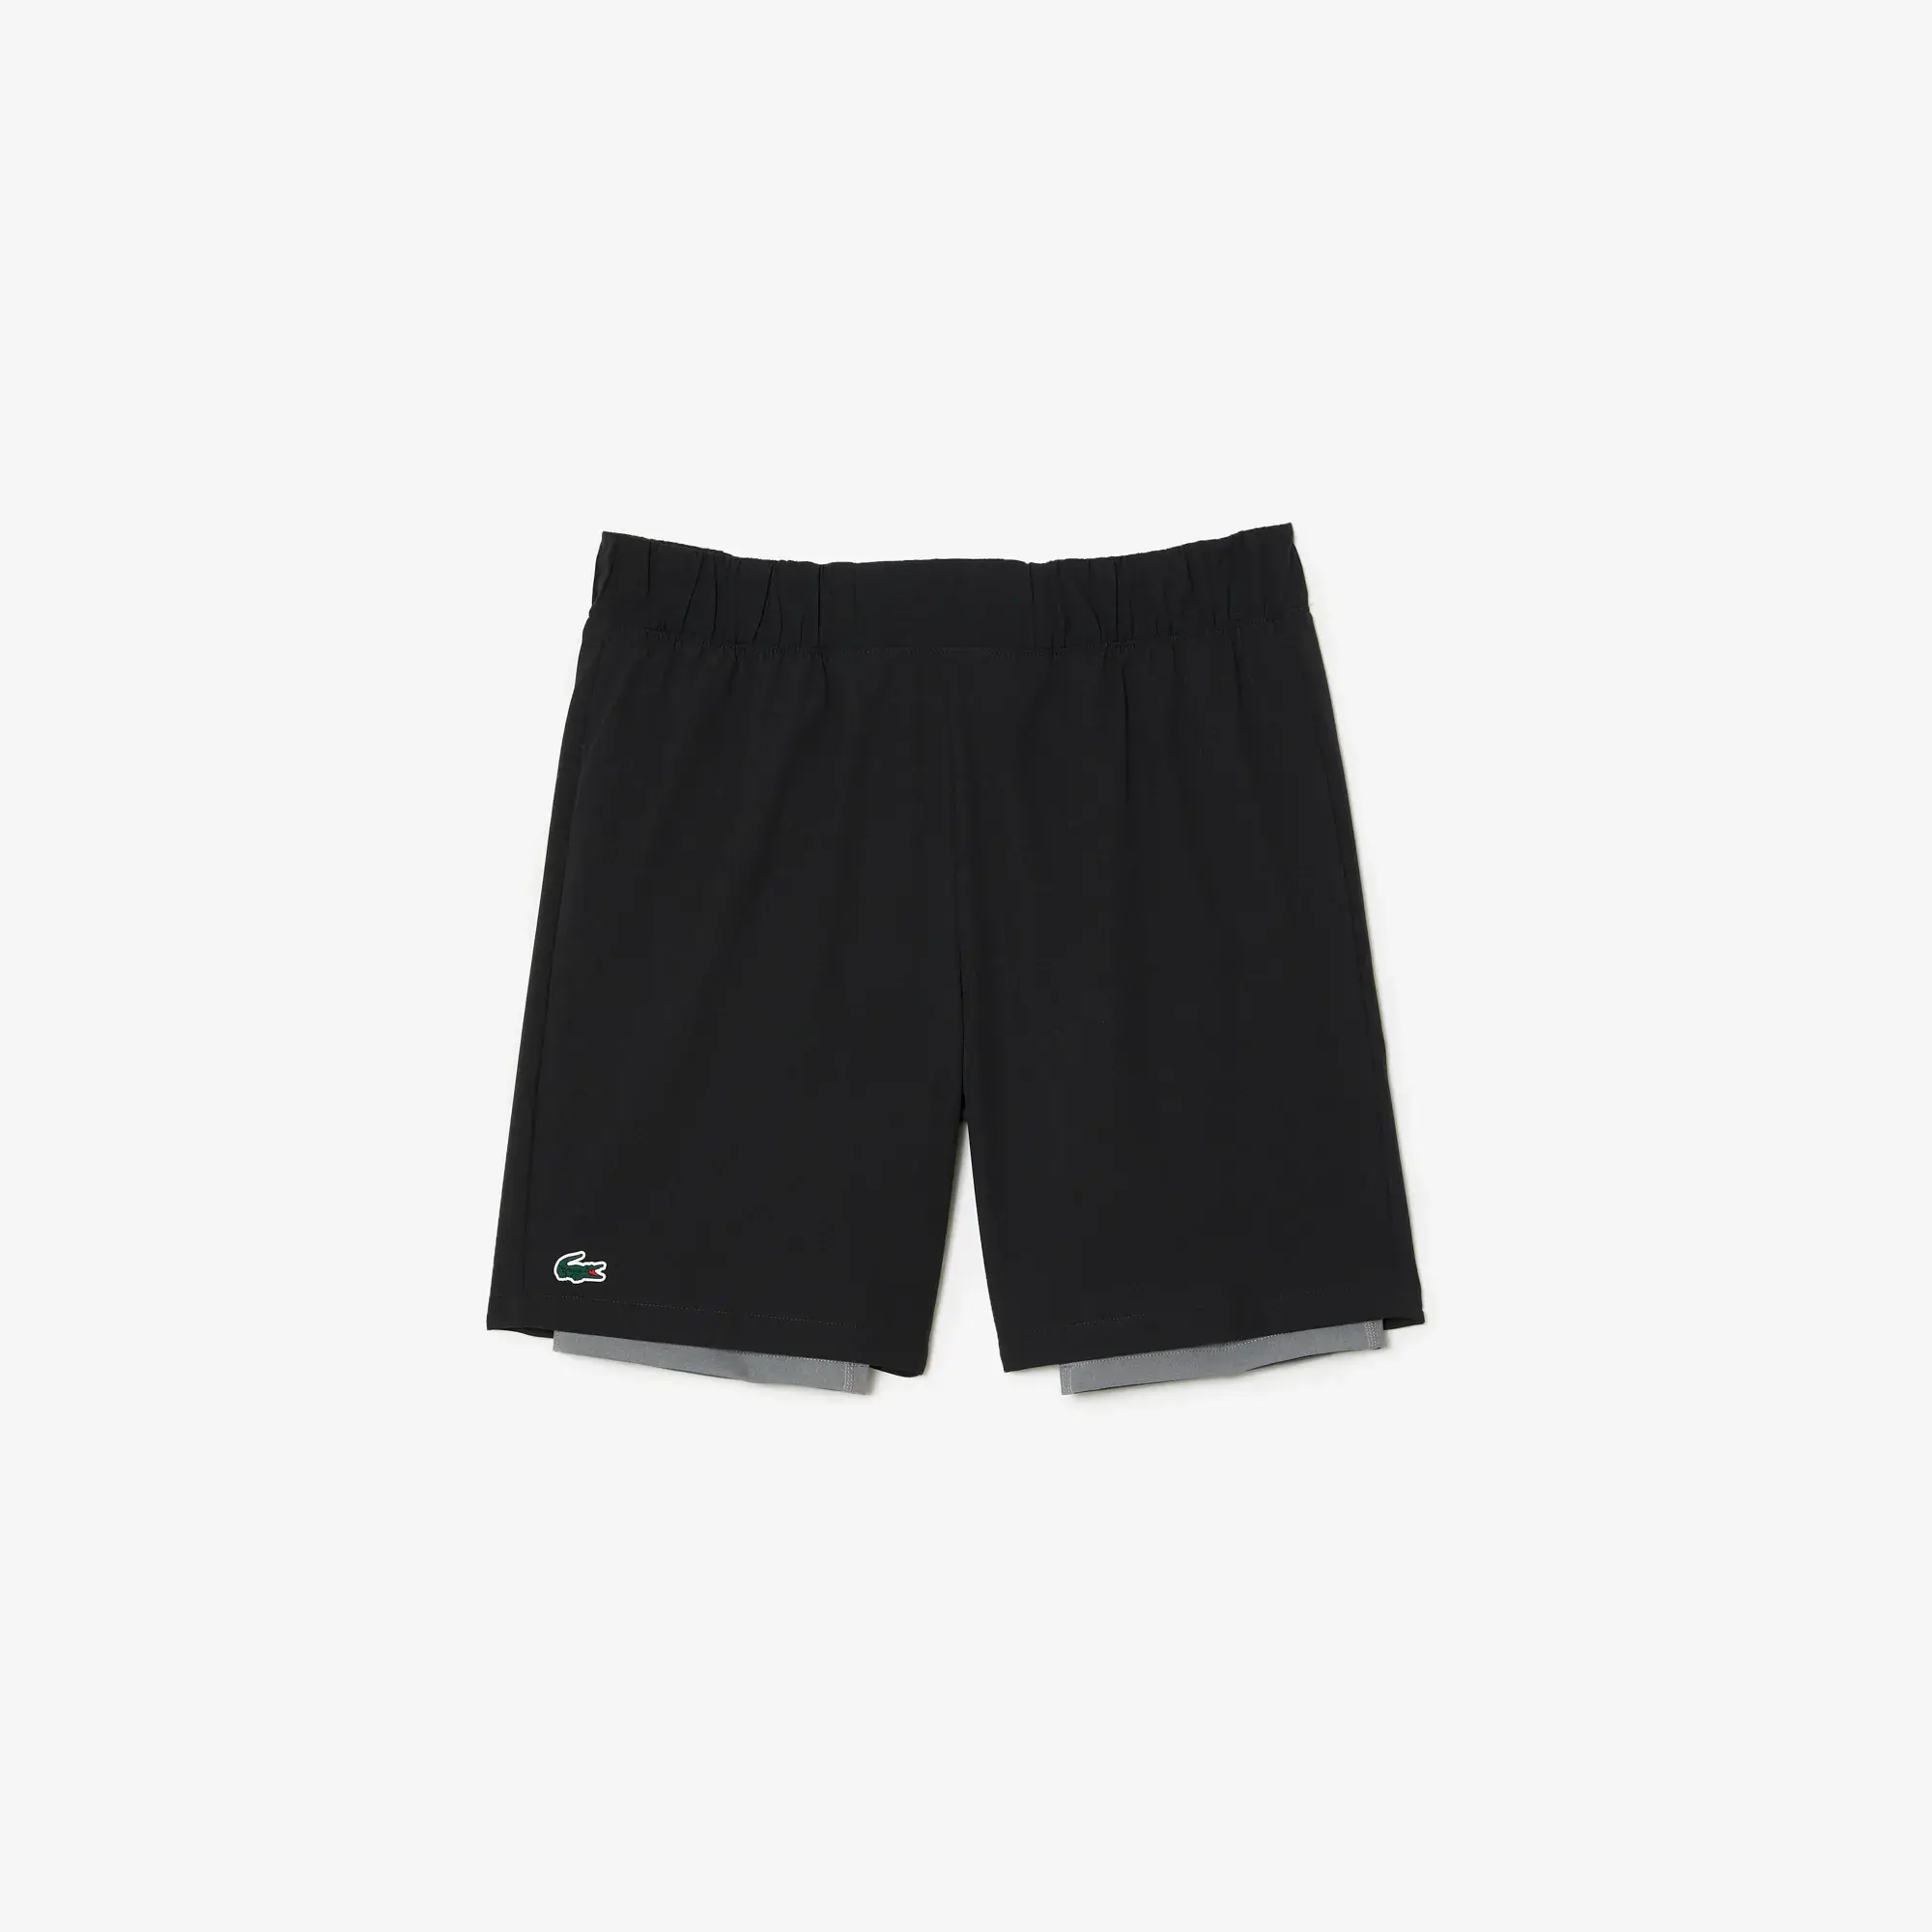 Lacoste Men’s Two-Tone SPORT Lined Shorts. 2